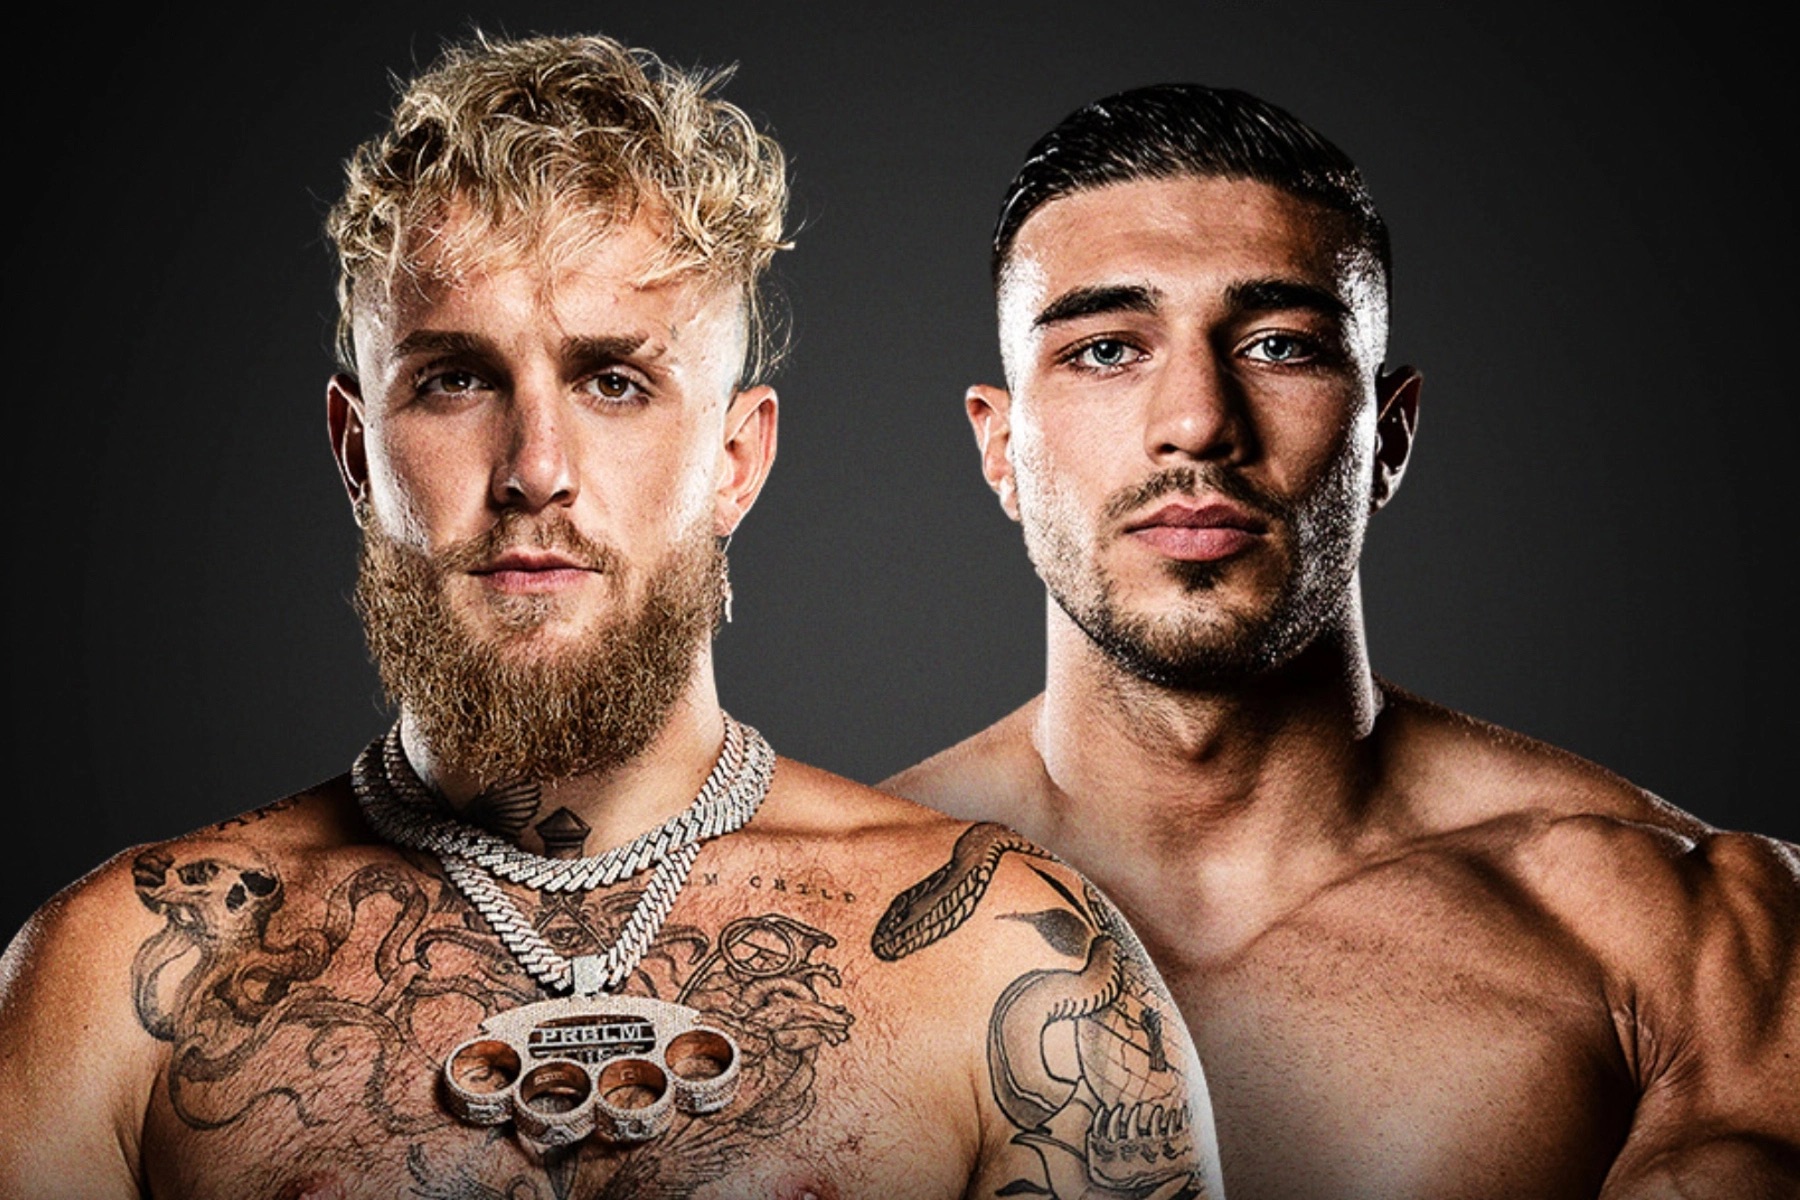 Jake Paul vs Tommy Fury live stream How to watch for free? Digital Trends